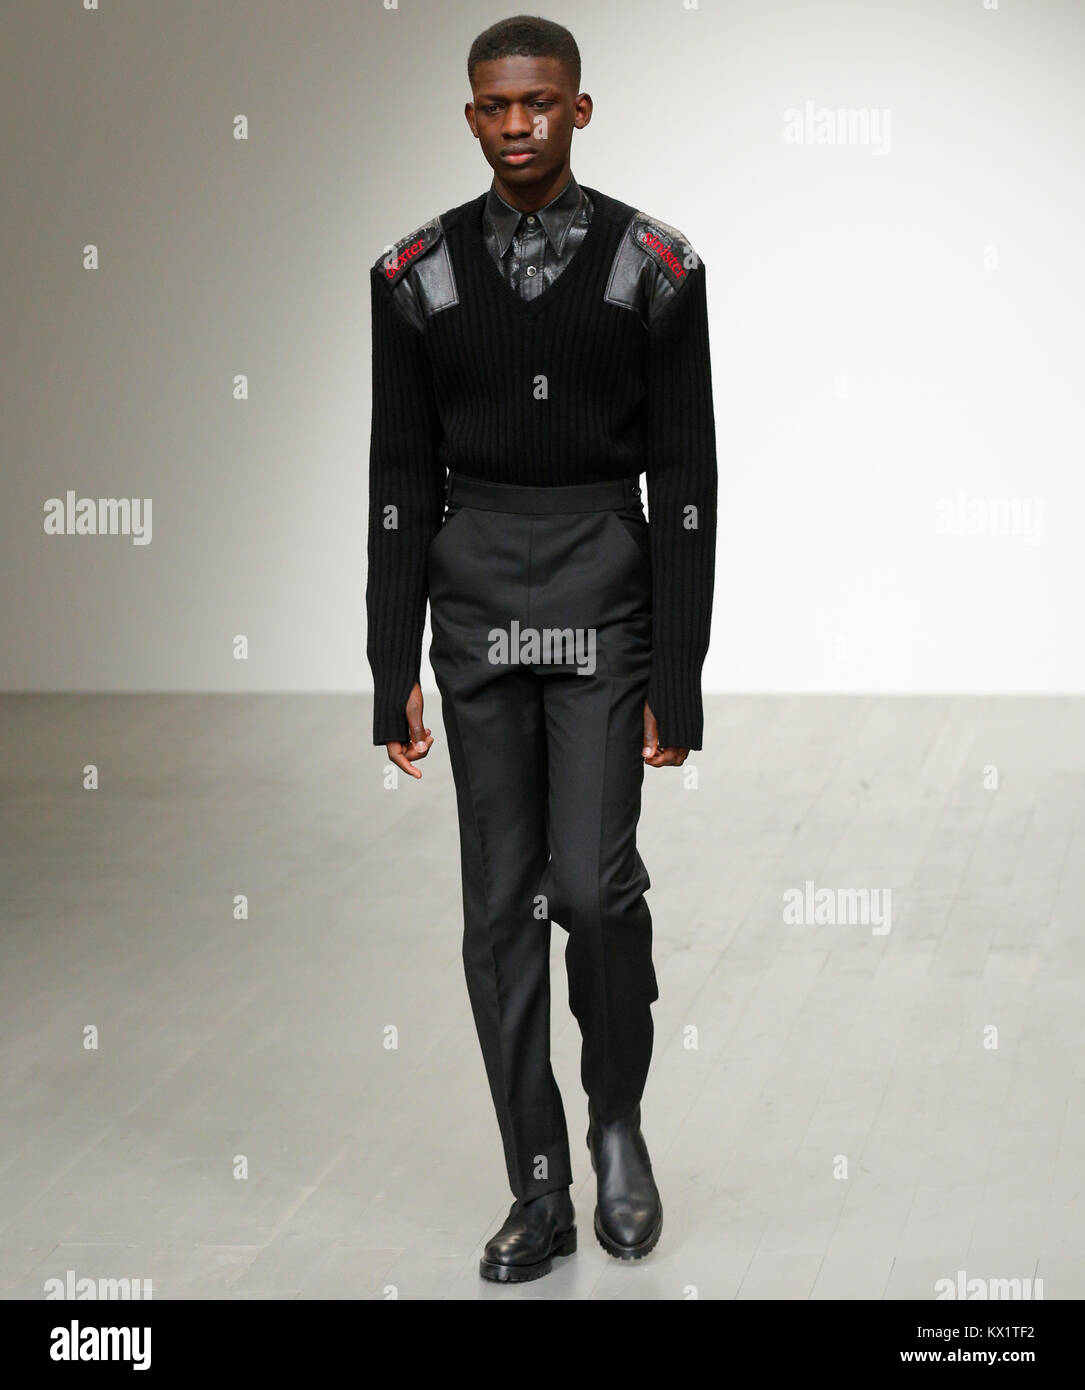 London, UK. 06th Jan, 2018. 6th of January 2018 John Lawrence Sullivan catwalk at London Fashion Week Men's AW18. British Fashion Council Show Space at Strand 180 presenting designers collections for aw18, fw18. Credit: catwalking/runways/Alamy Live News Stock Photo